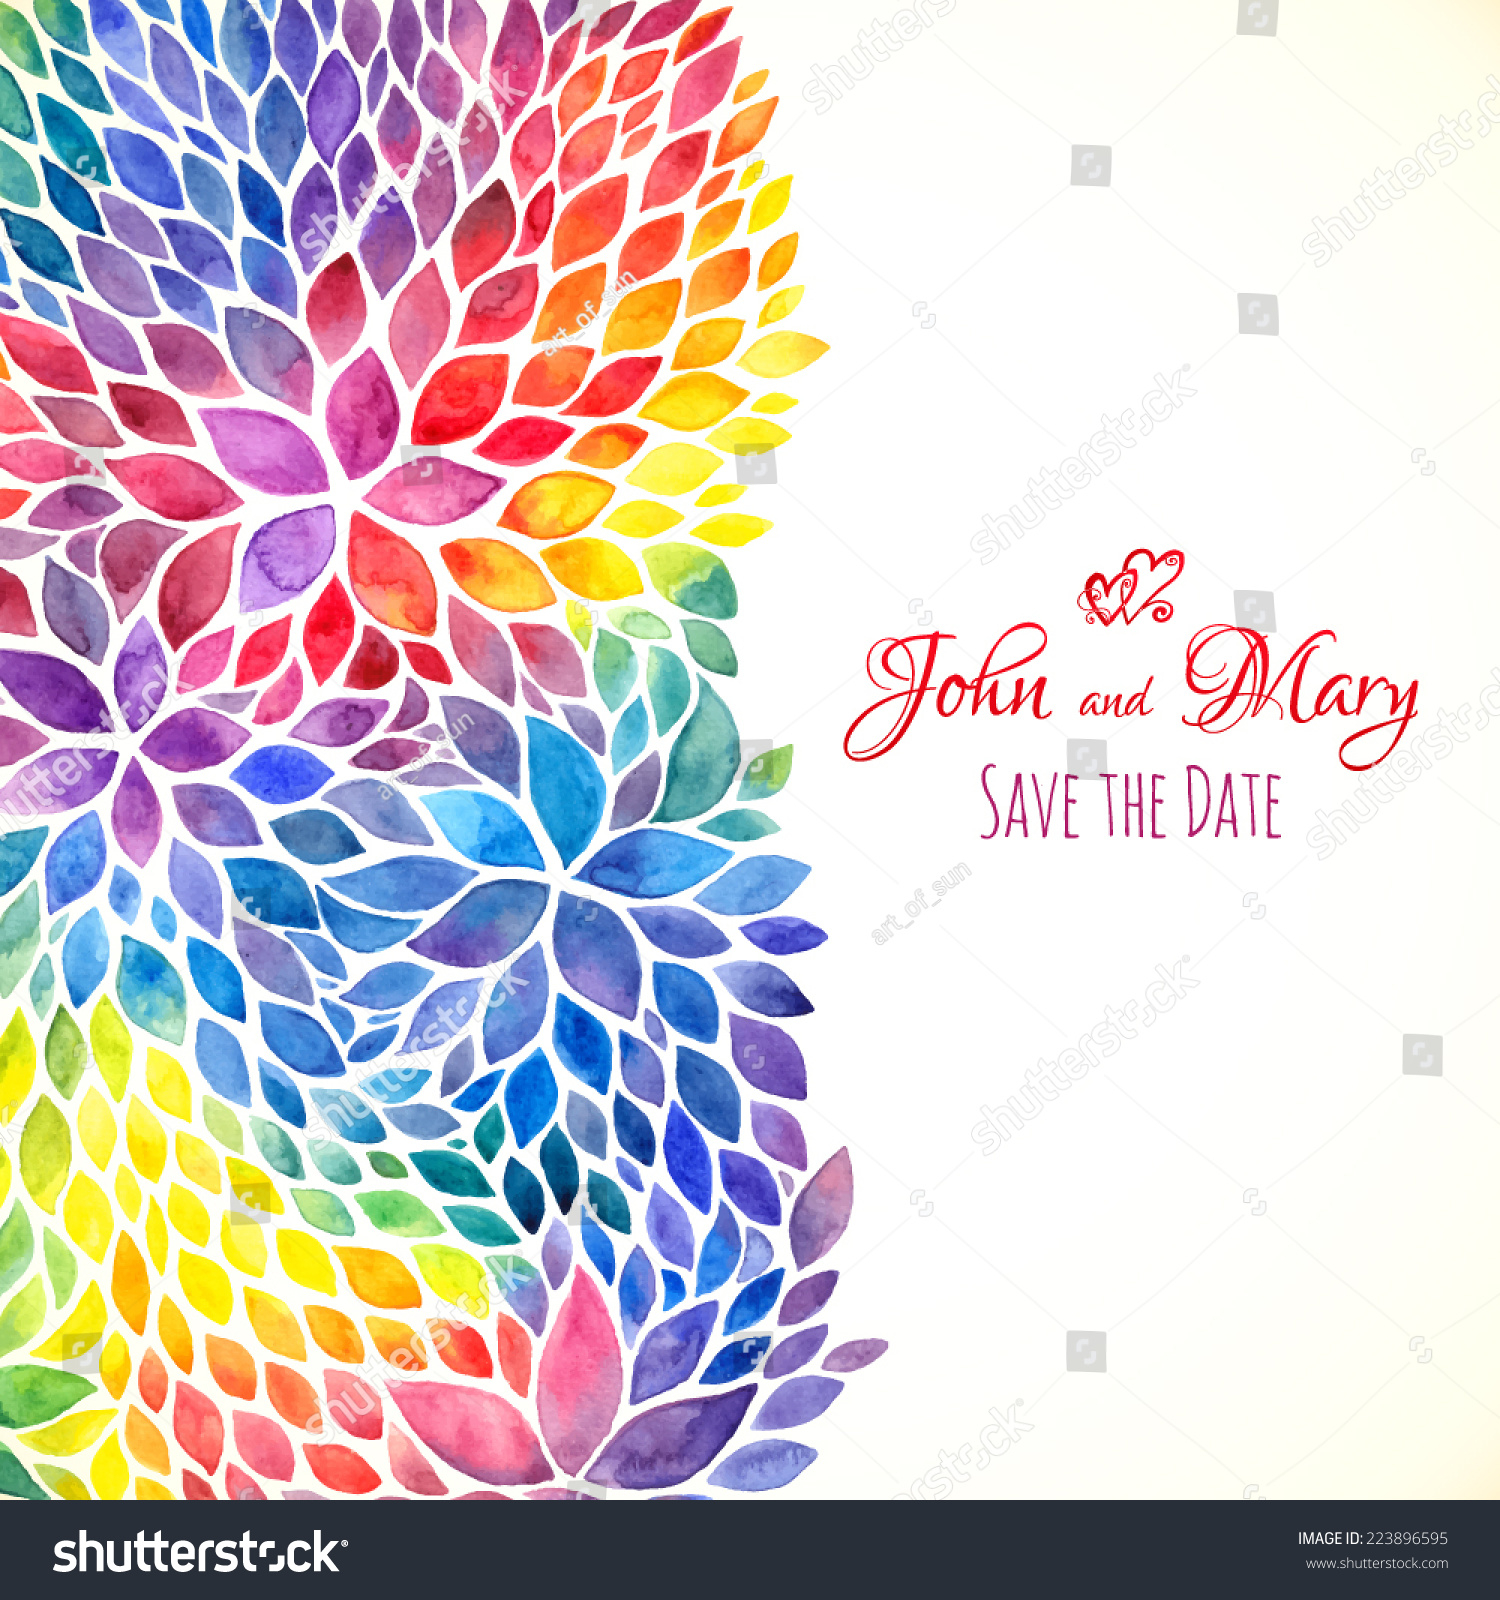 Watercolor Painted Rainbow Colors Vector Wedding Stock Vector intended for sizing 1500 X 1600